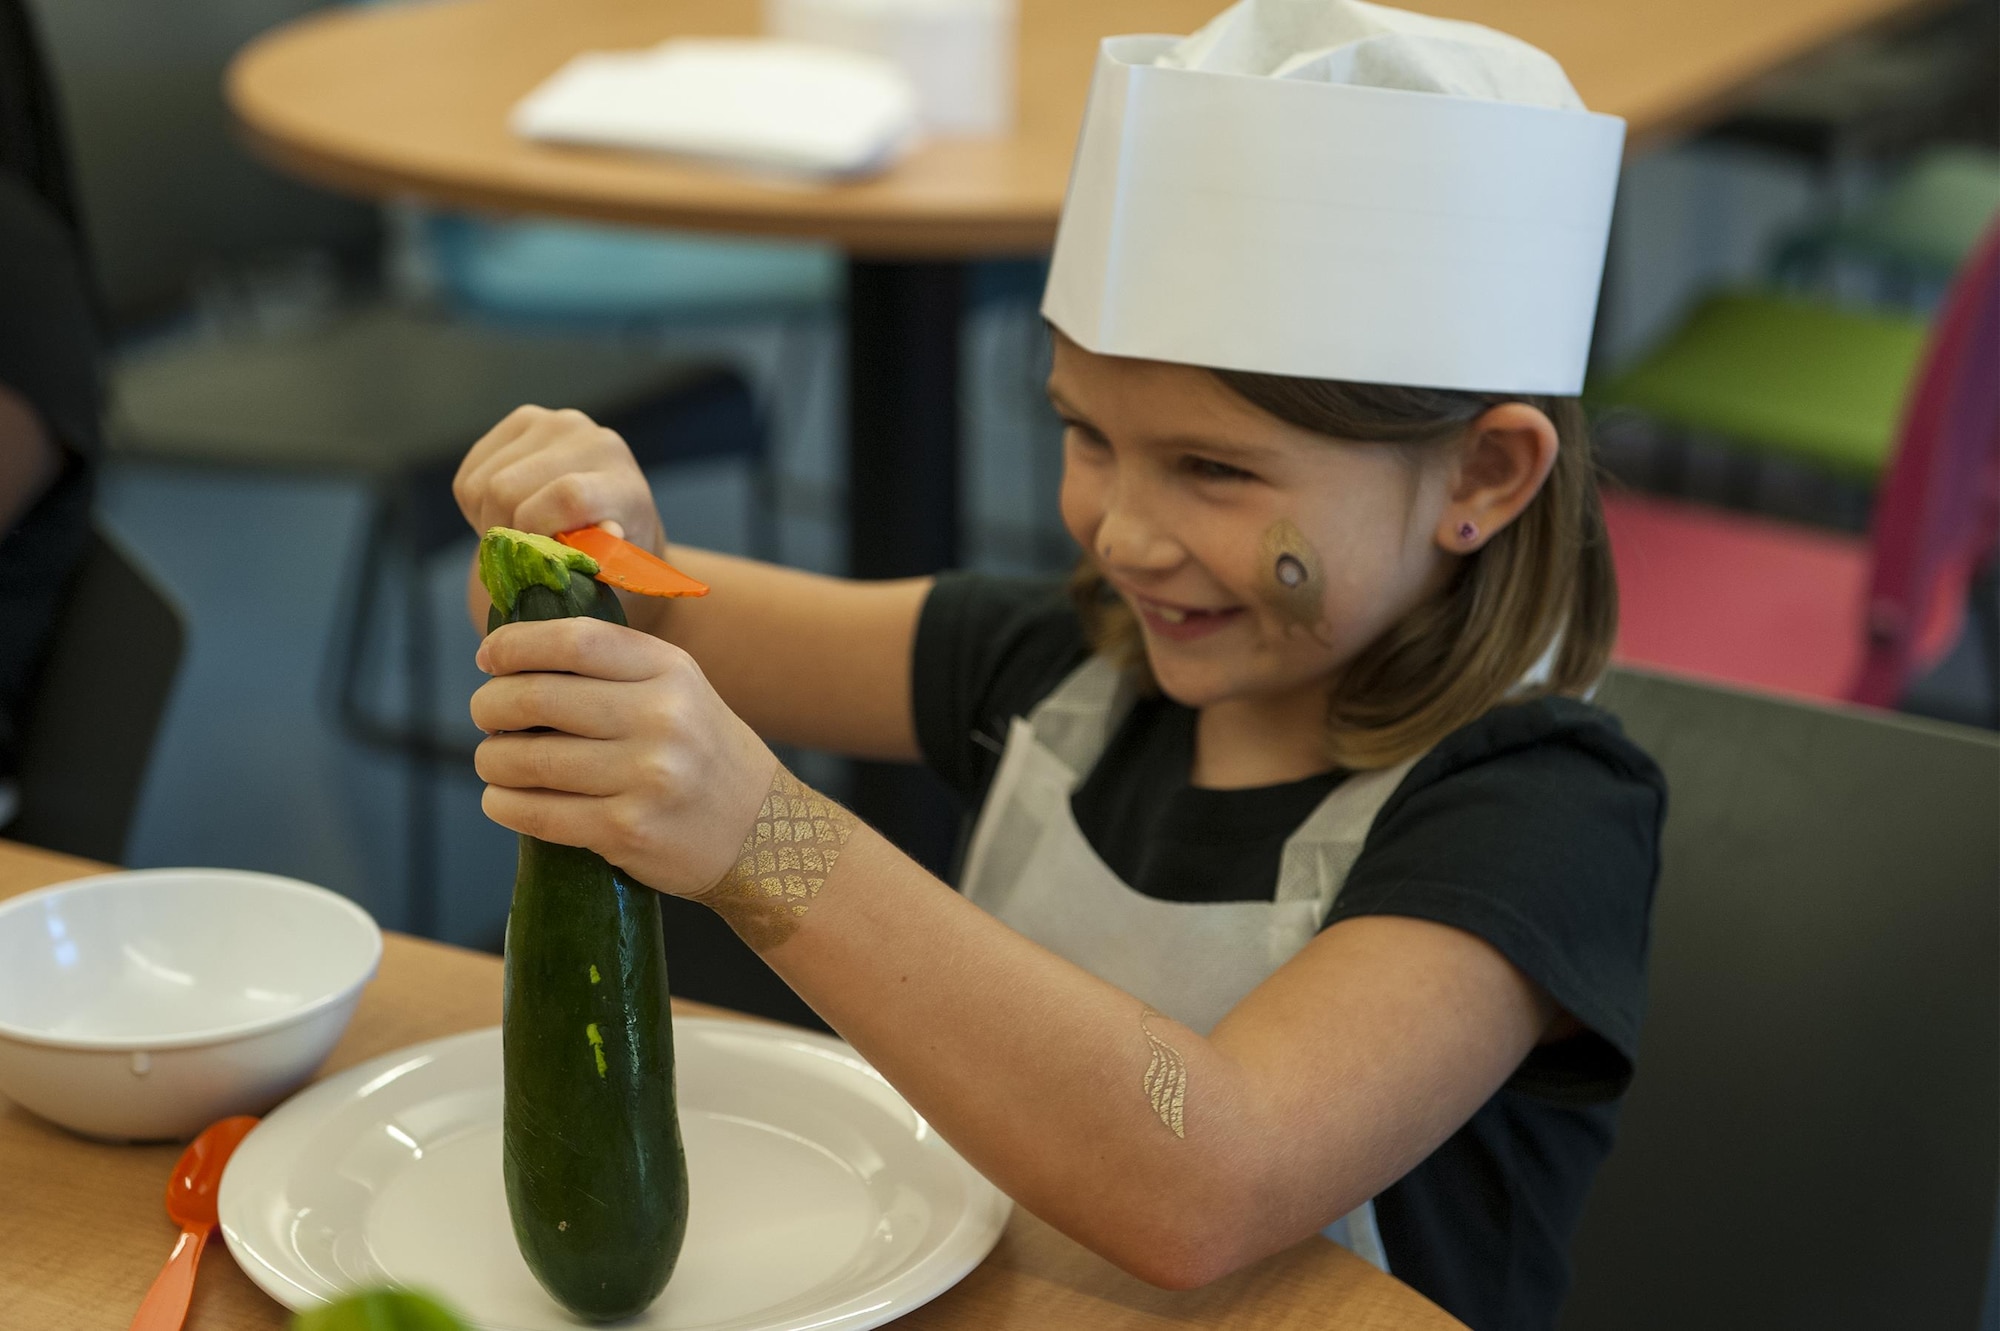 Isabella, daughter of U.S. Air Force Master Sgt. Jennifer Smith, 23d Force Support Squadron manpower and organization superintendent, cuts a zucchini during a youth cooking camp, July 26, 2016, at Moody Air Force Base, Ga. During the camp, children learned how to cook from various recipes and practiced proper sanitation and food handling techniques. (U.S. Air Force photo by Airman 1st Class Lauren M. Hunter)